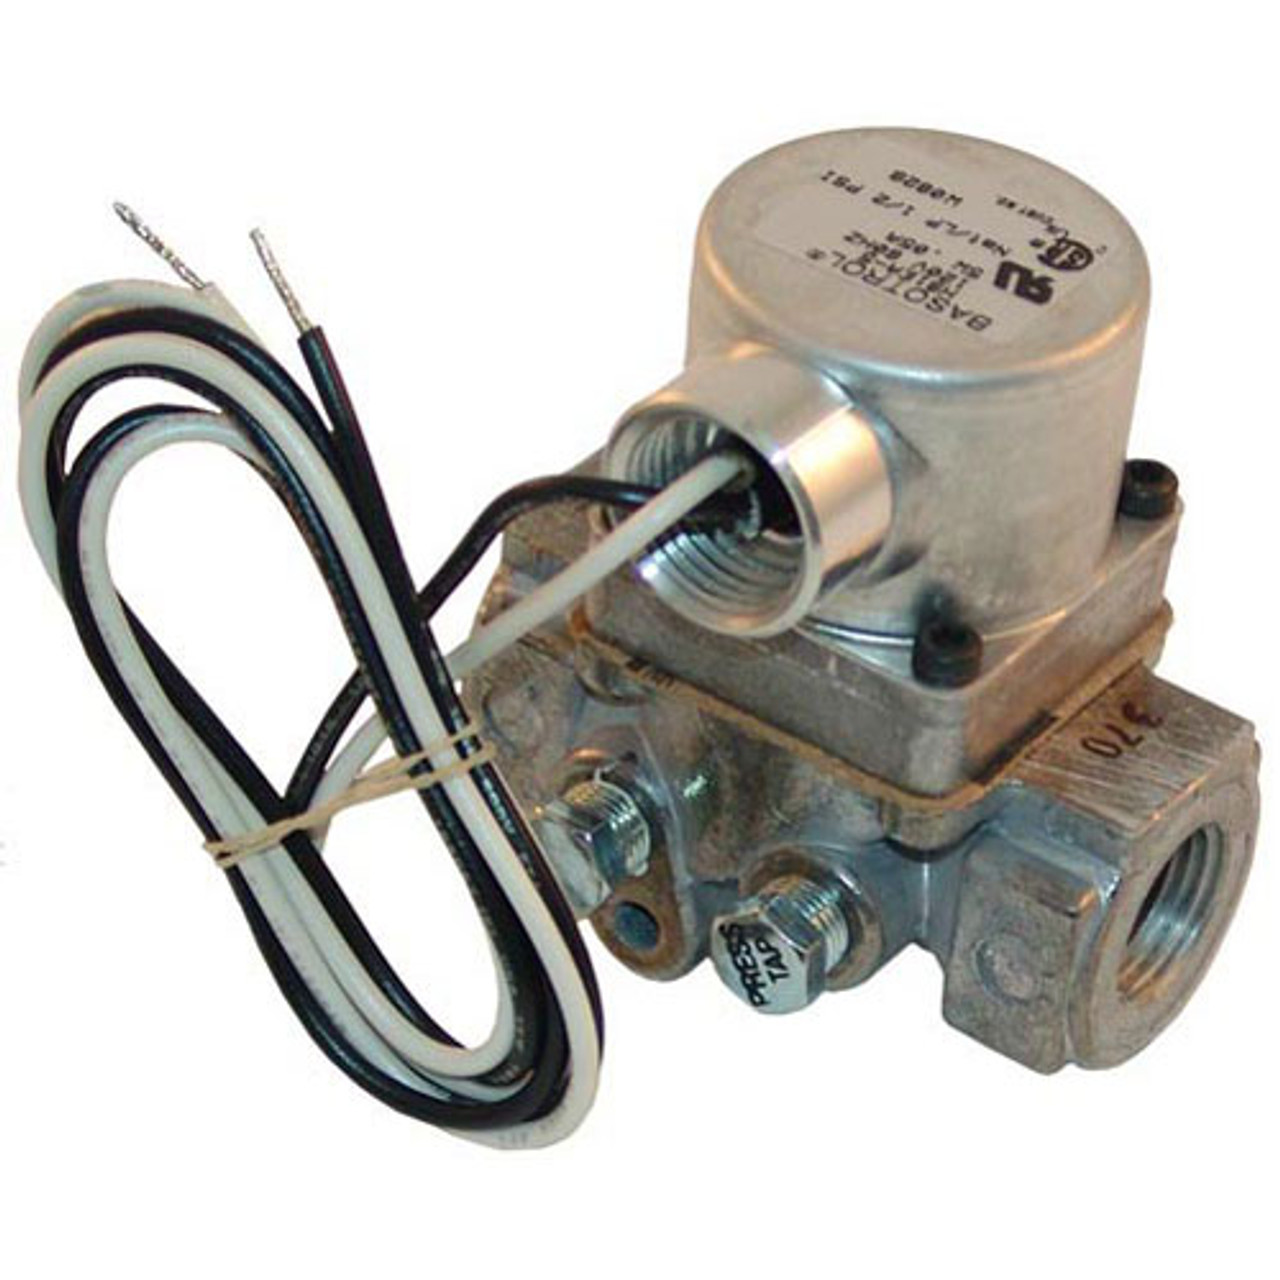 Valve, Gas Solenoid -1/2" 120V - Replacement Part For Hickory 729